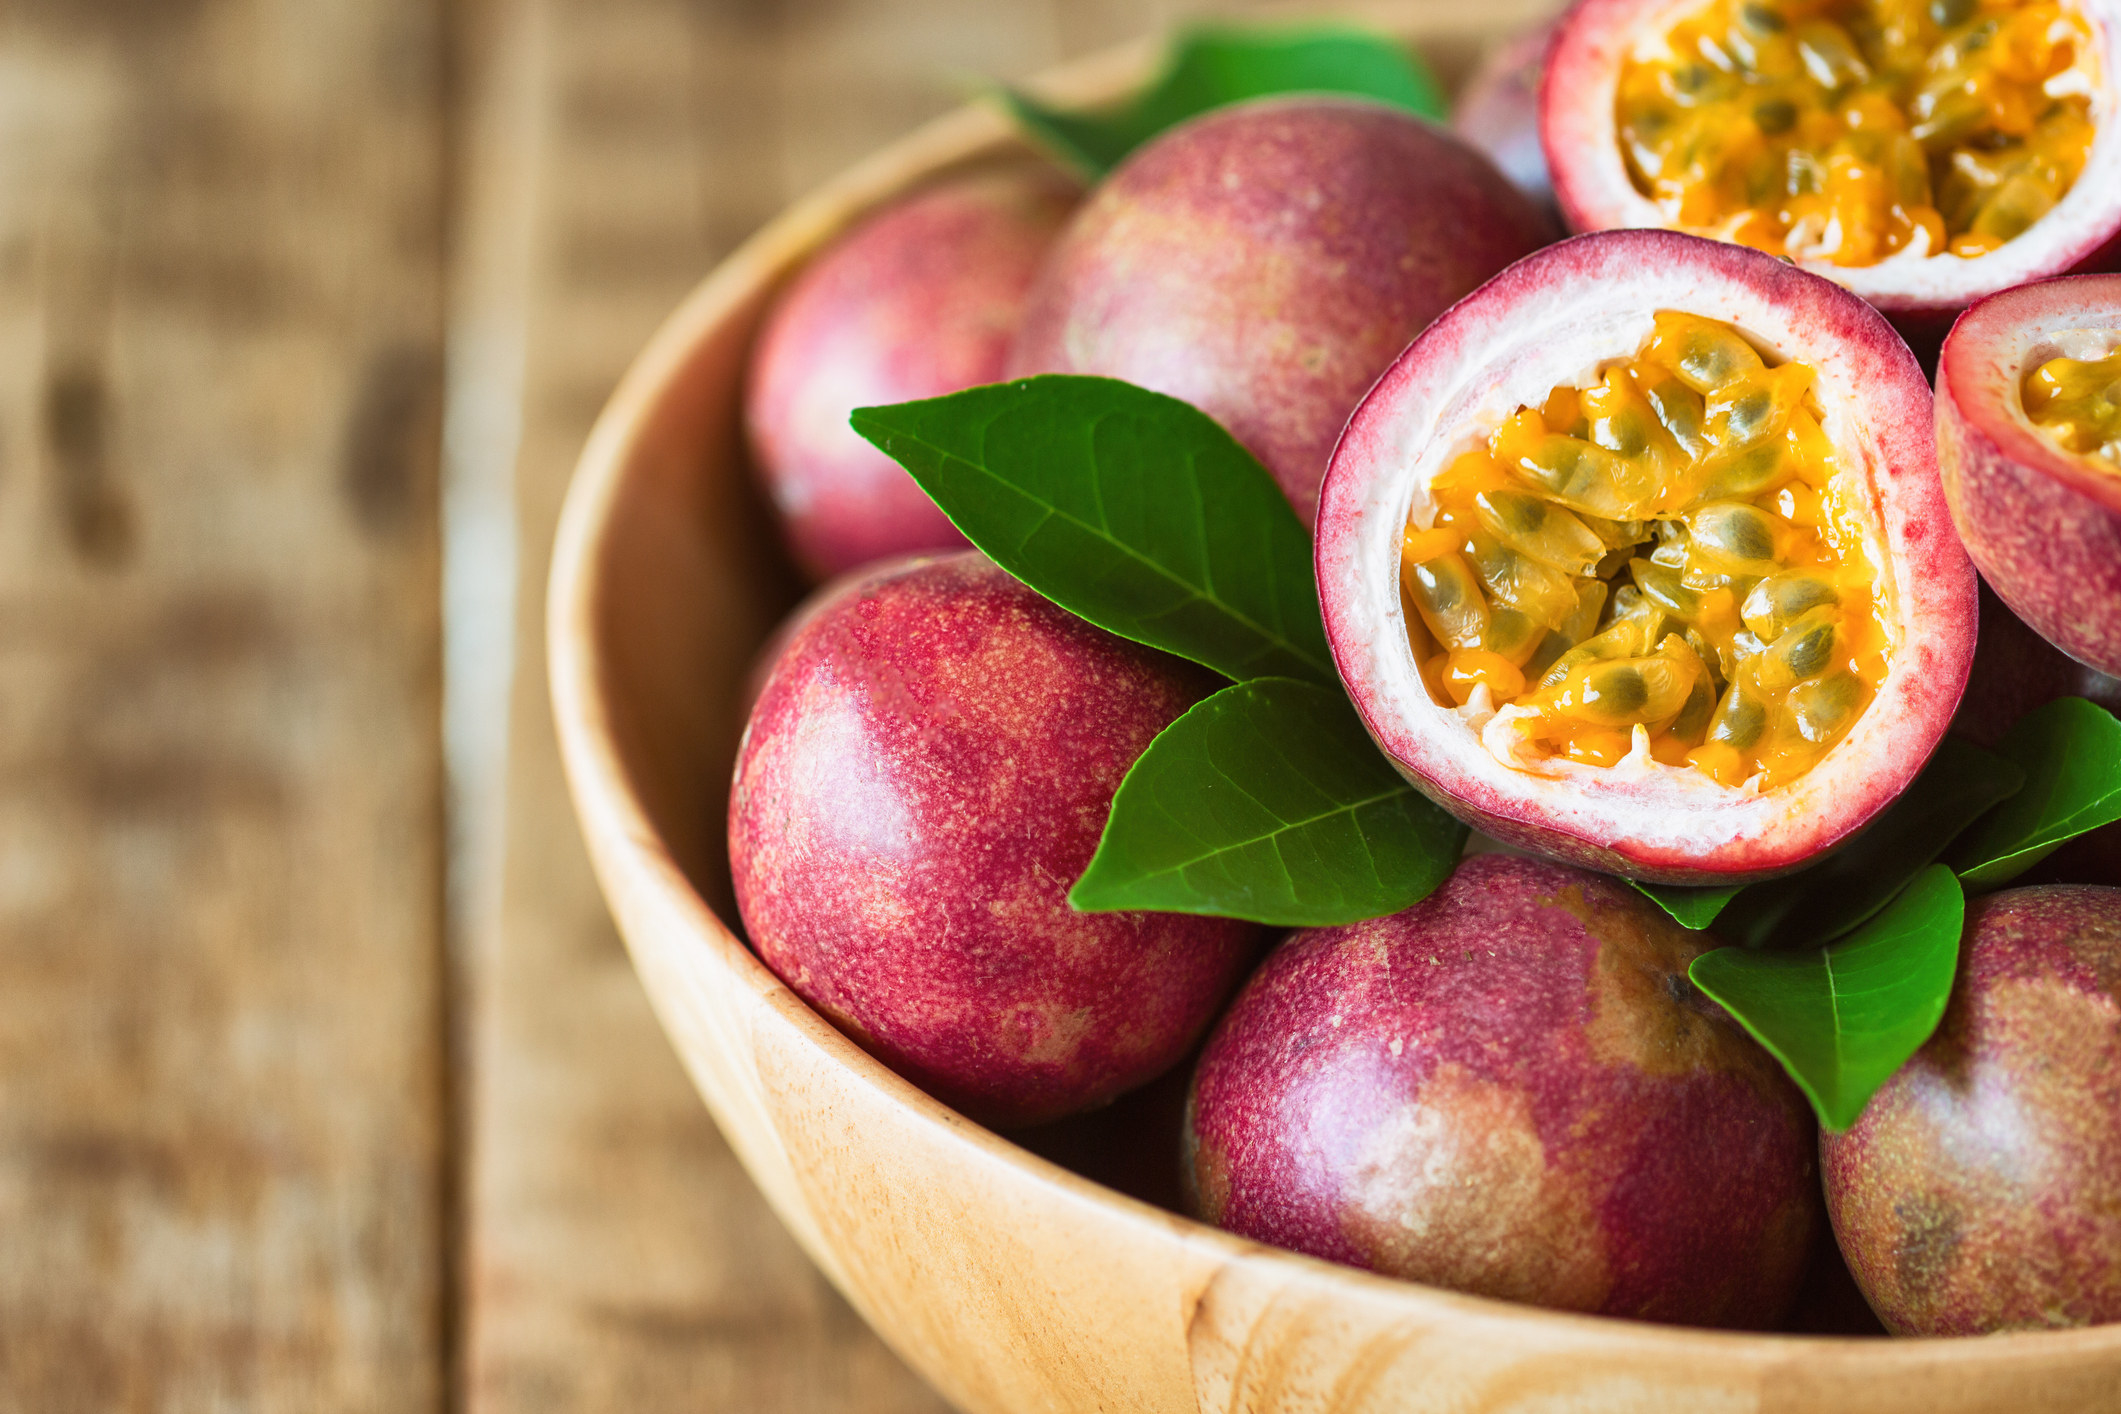 bowl of passionfruits with one cut open